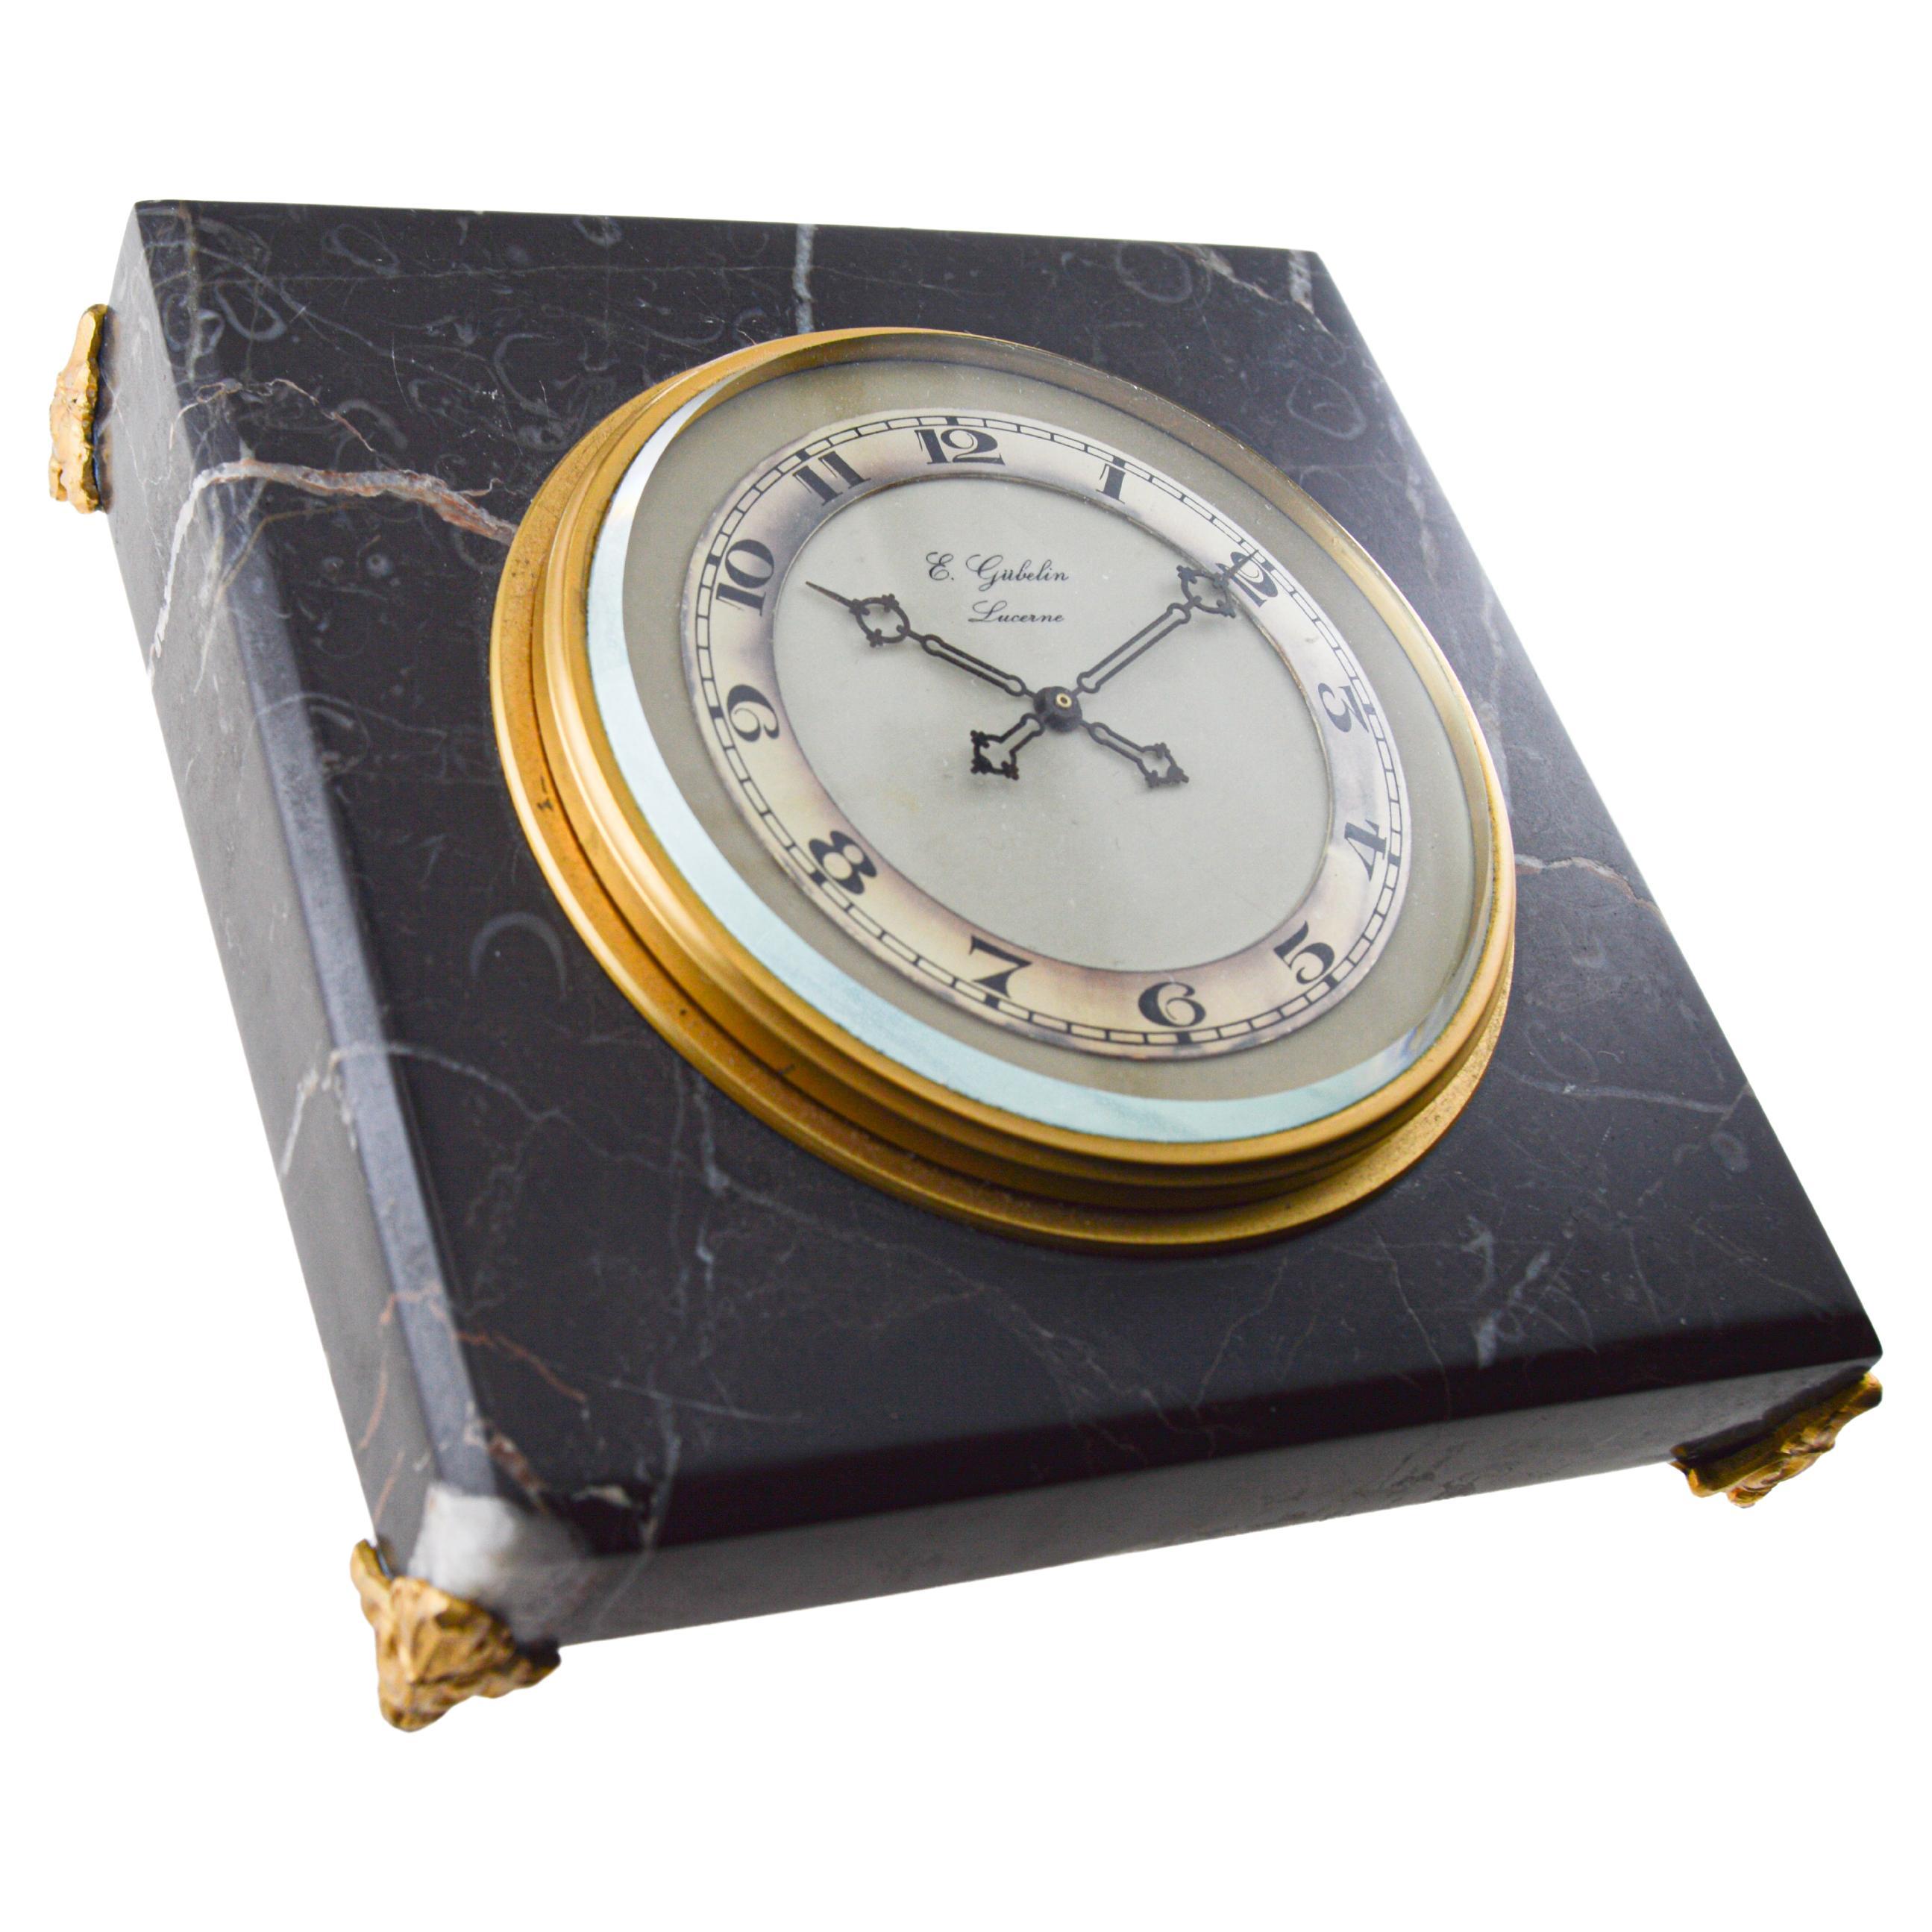 1930s E. Gubelin Watch Company Art Deco Stone Manually Wound Table Clock For Sale 1